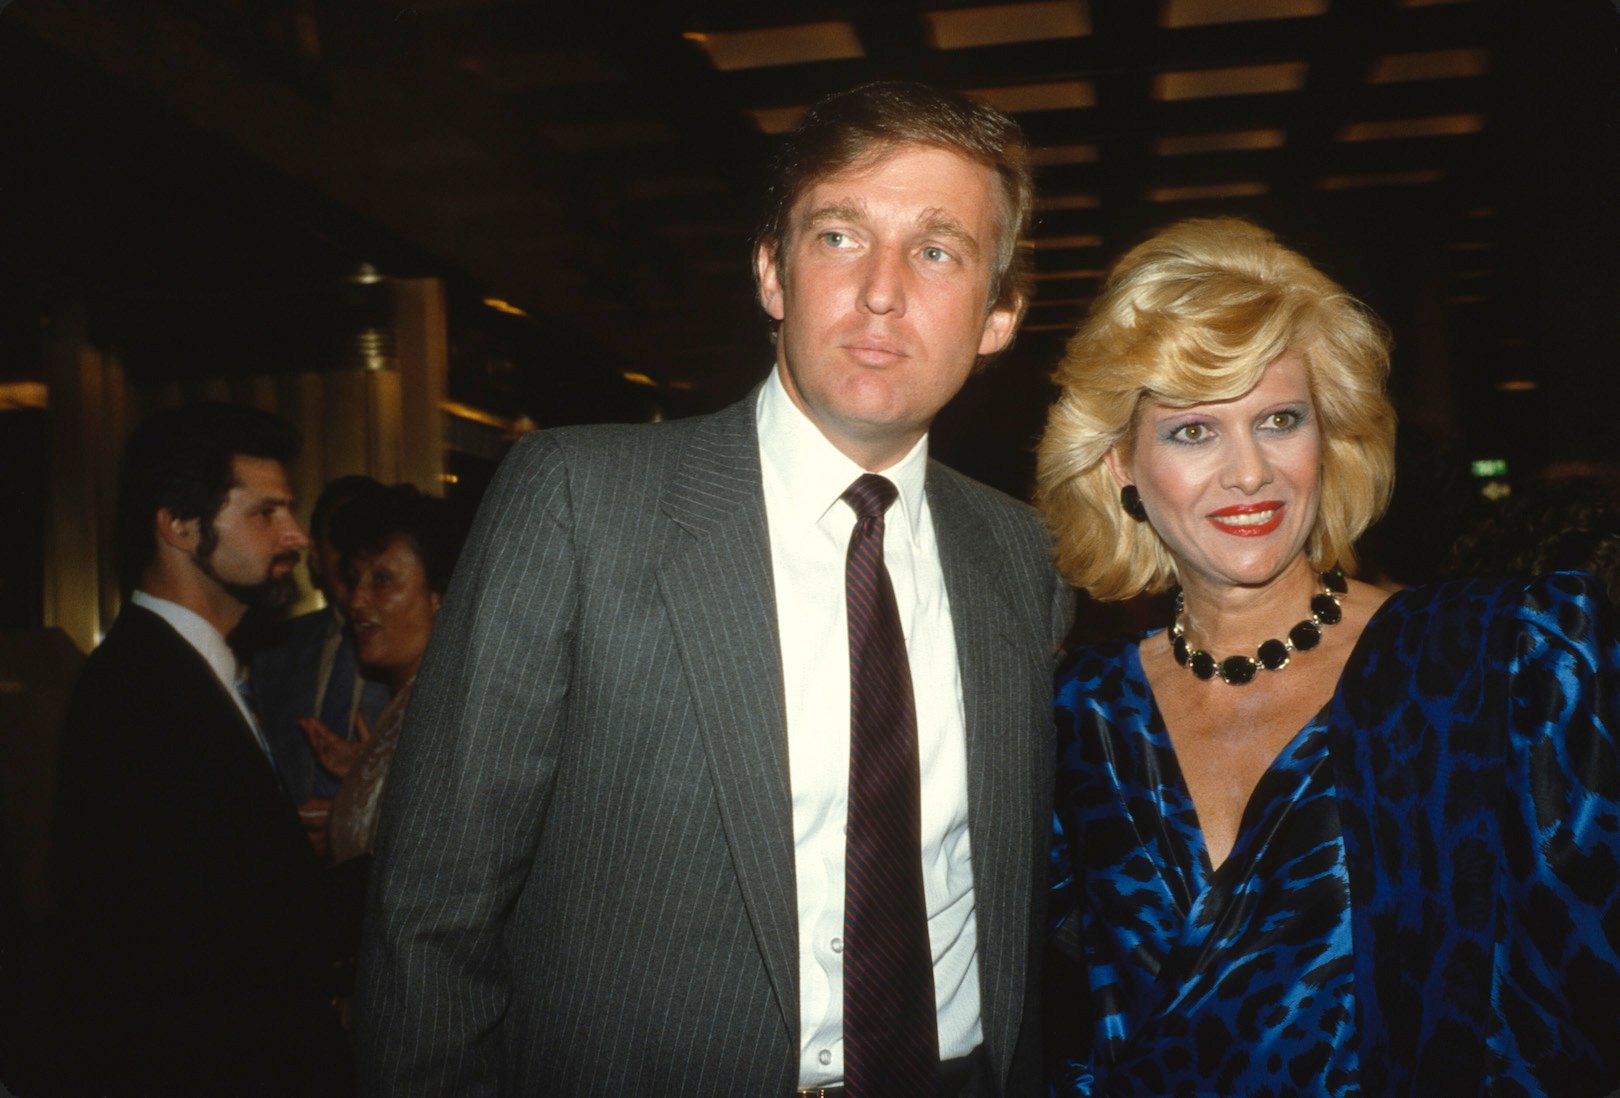 Ivana Trump and husband Donald Trump smiling together in 1984